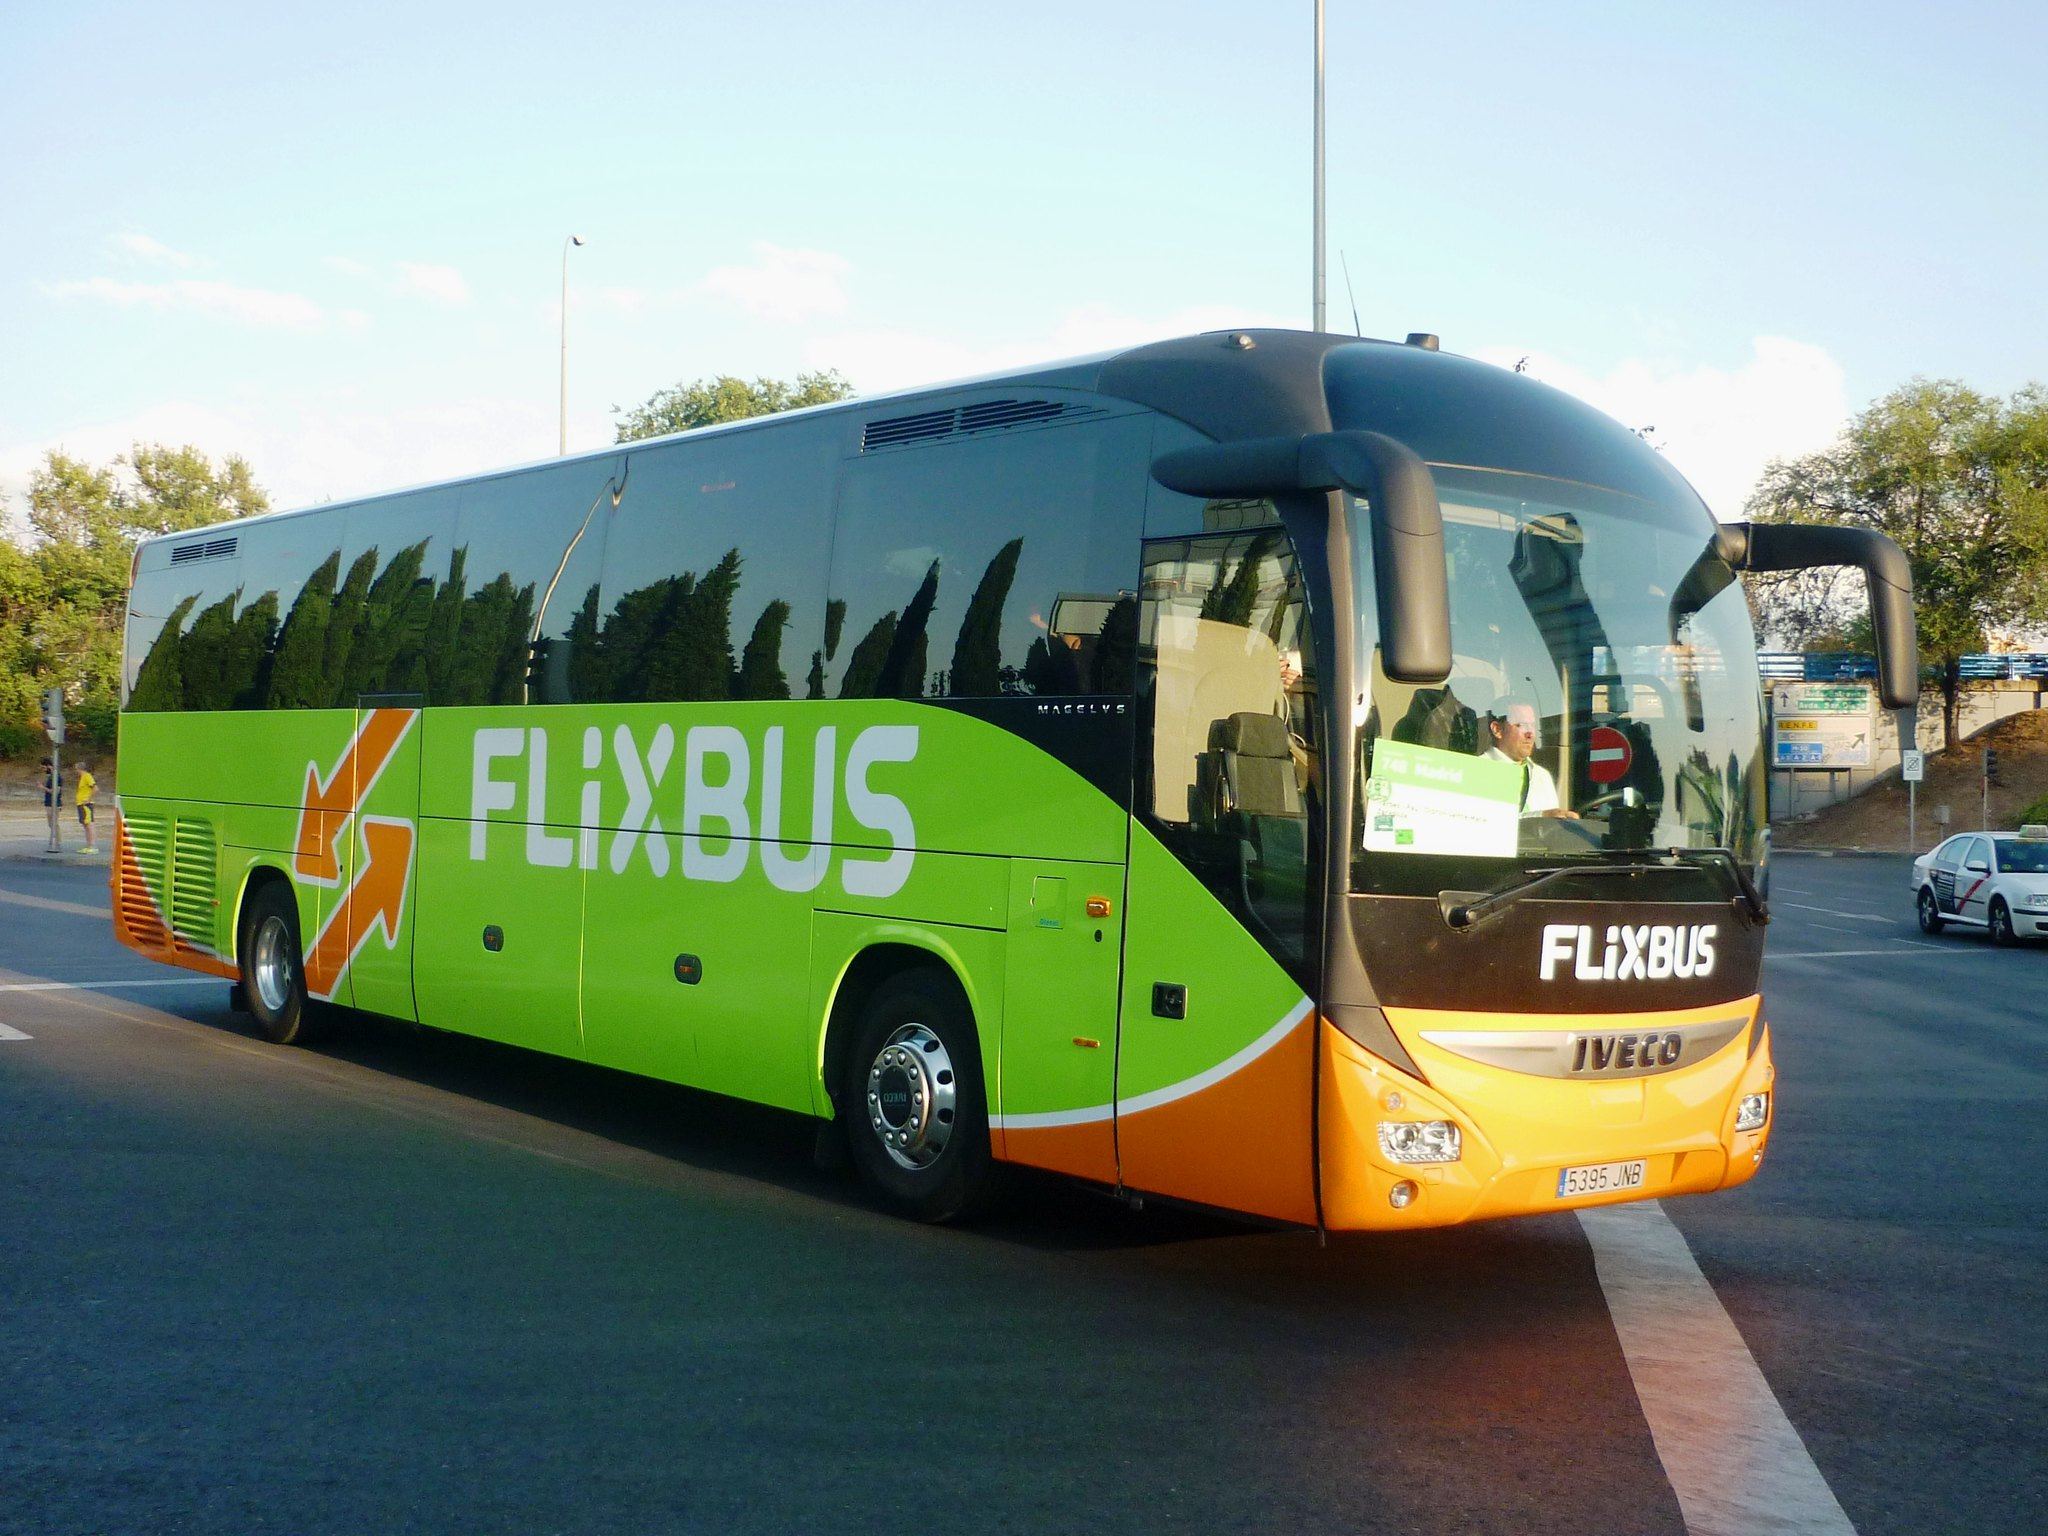 Cancellation Policy of Flixbus in the United States and Europe